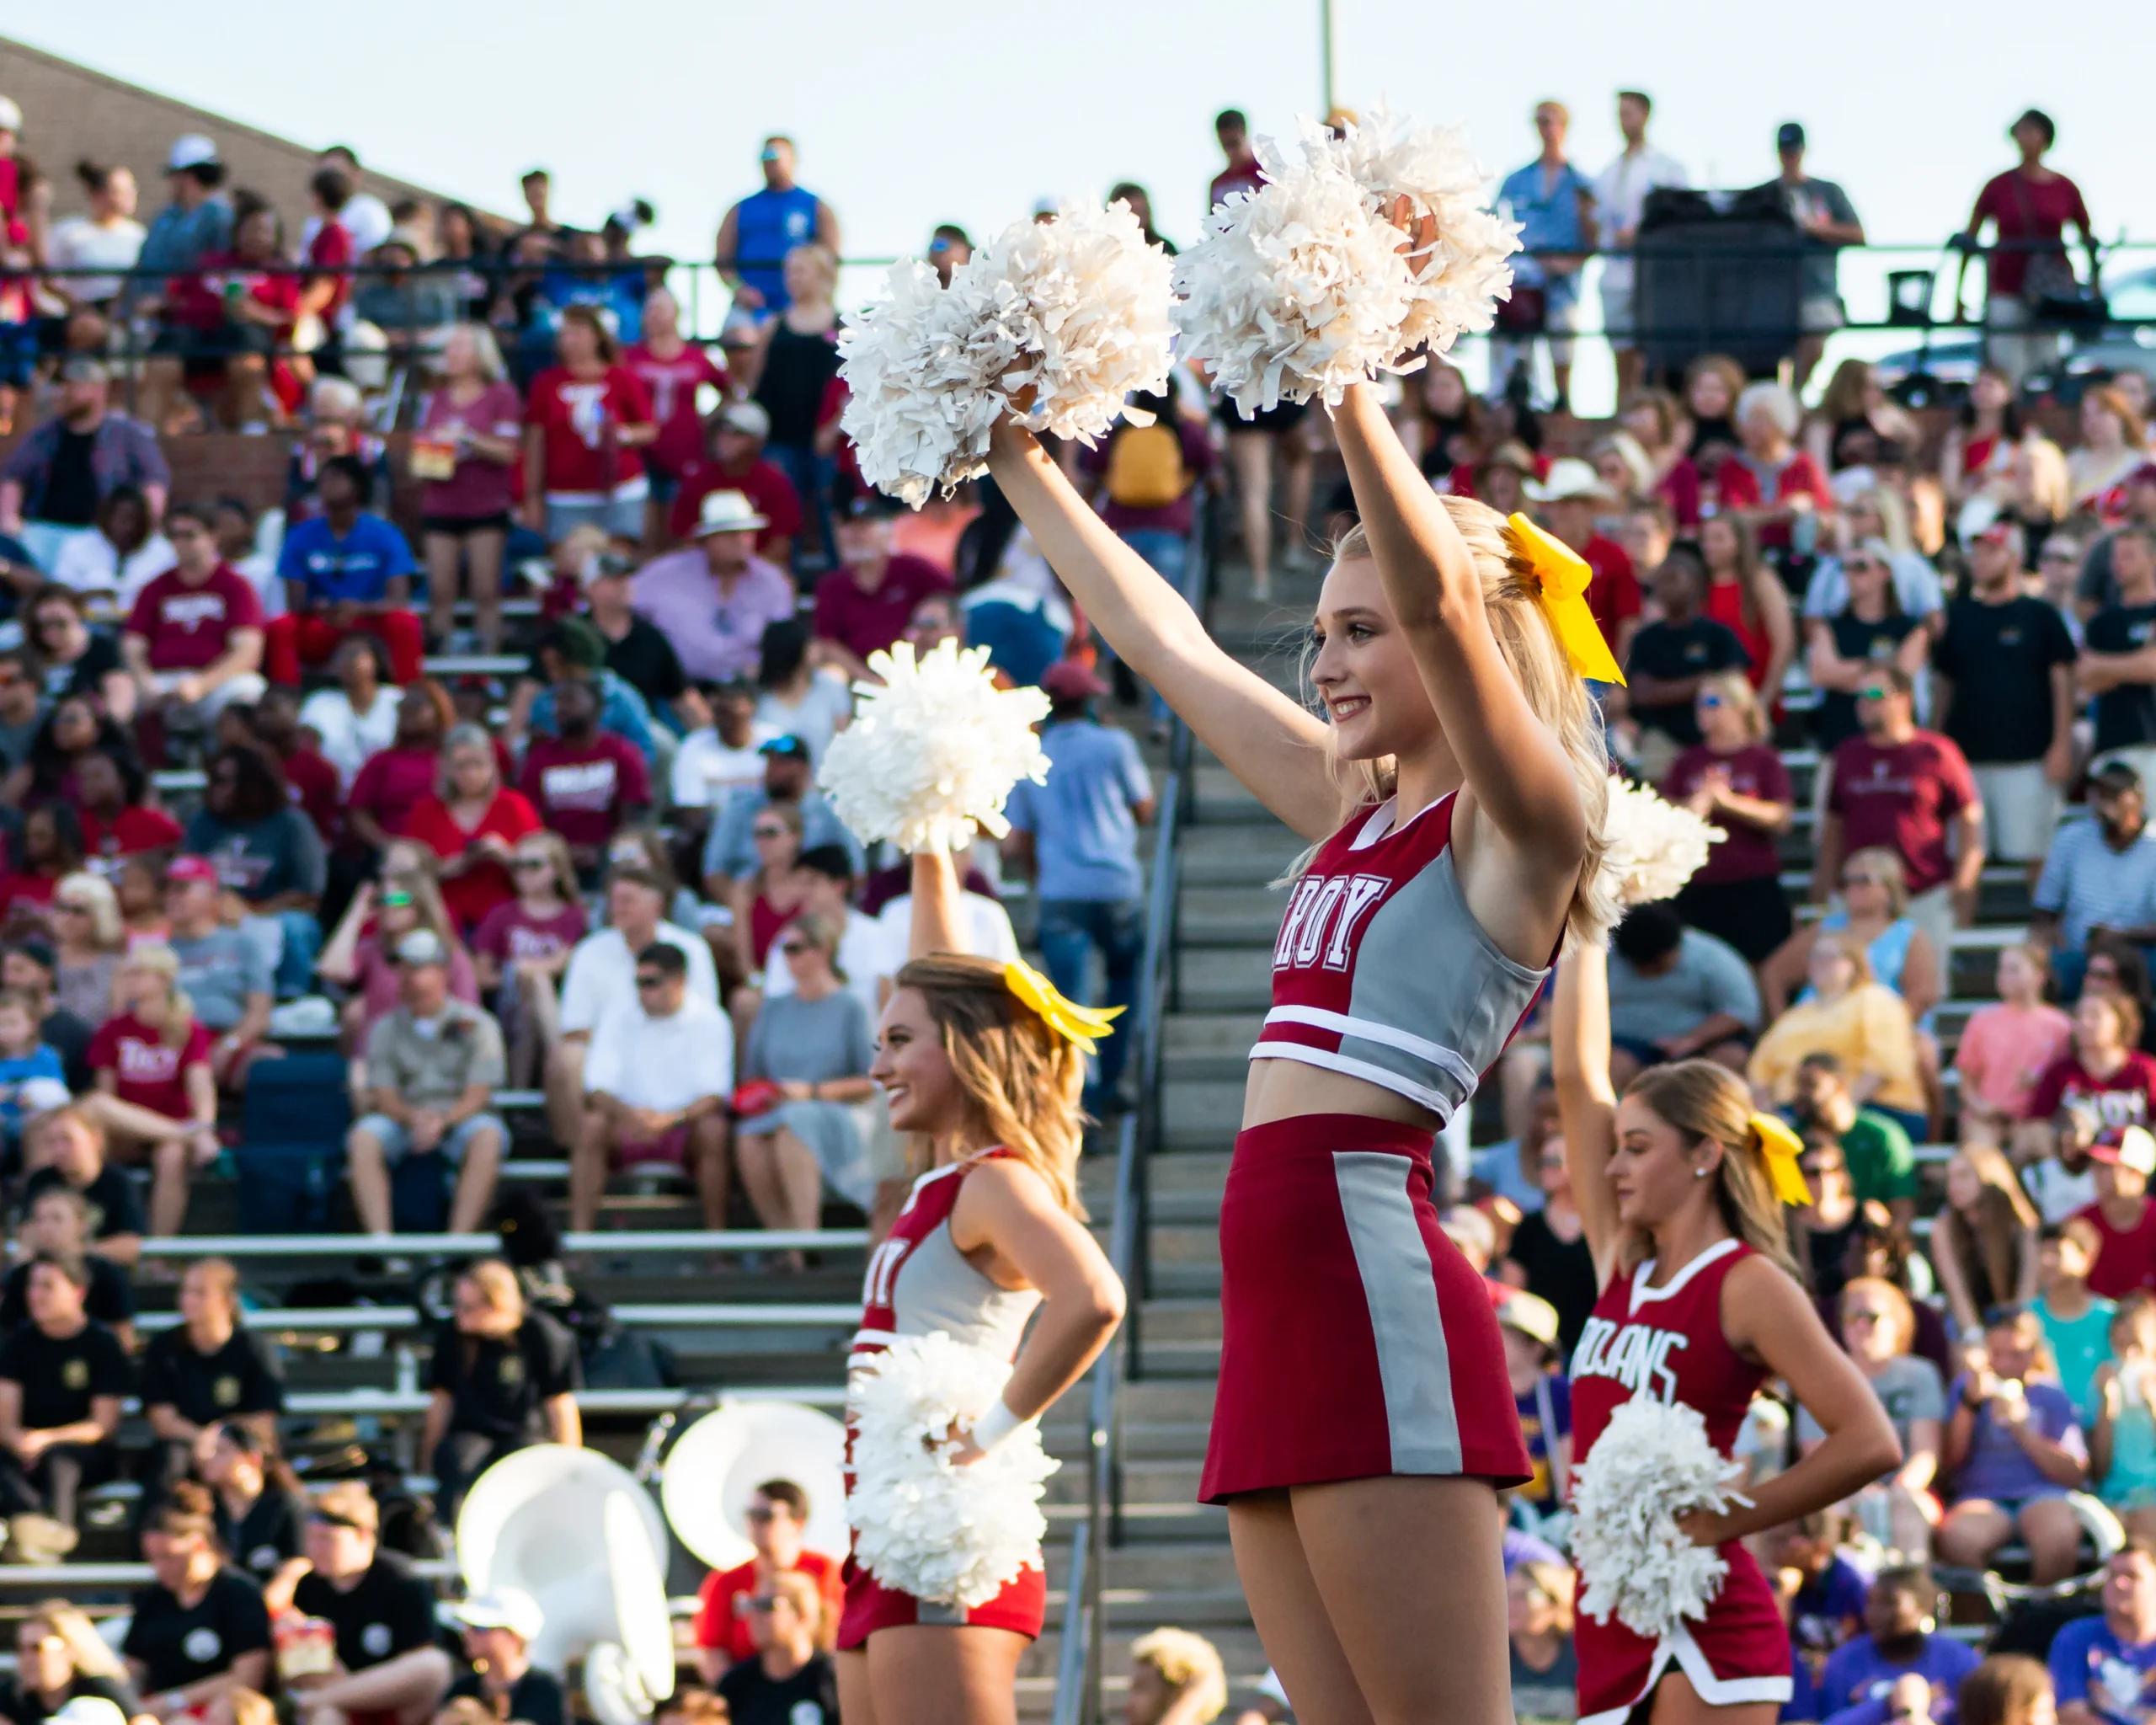 A group of cheerleaders at a sporting event